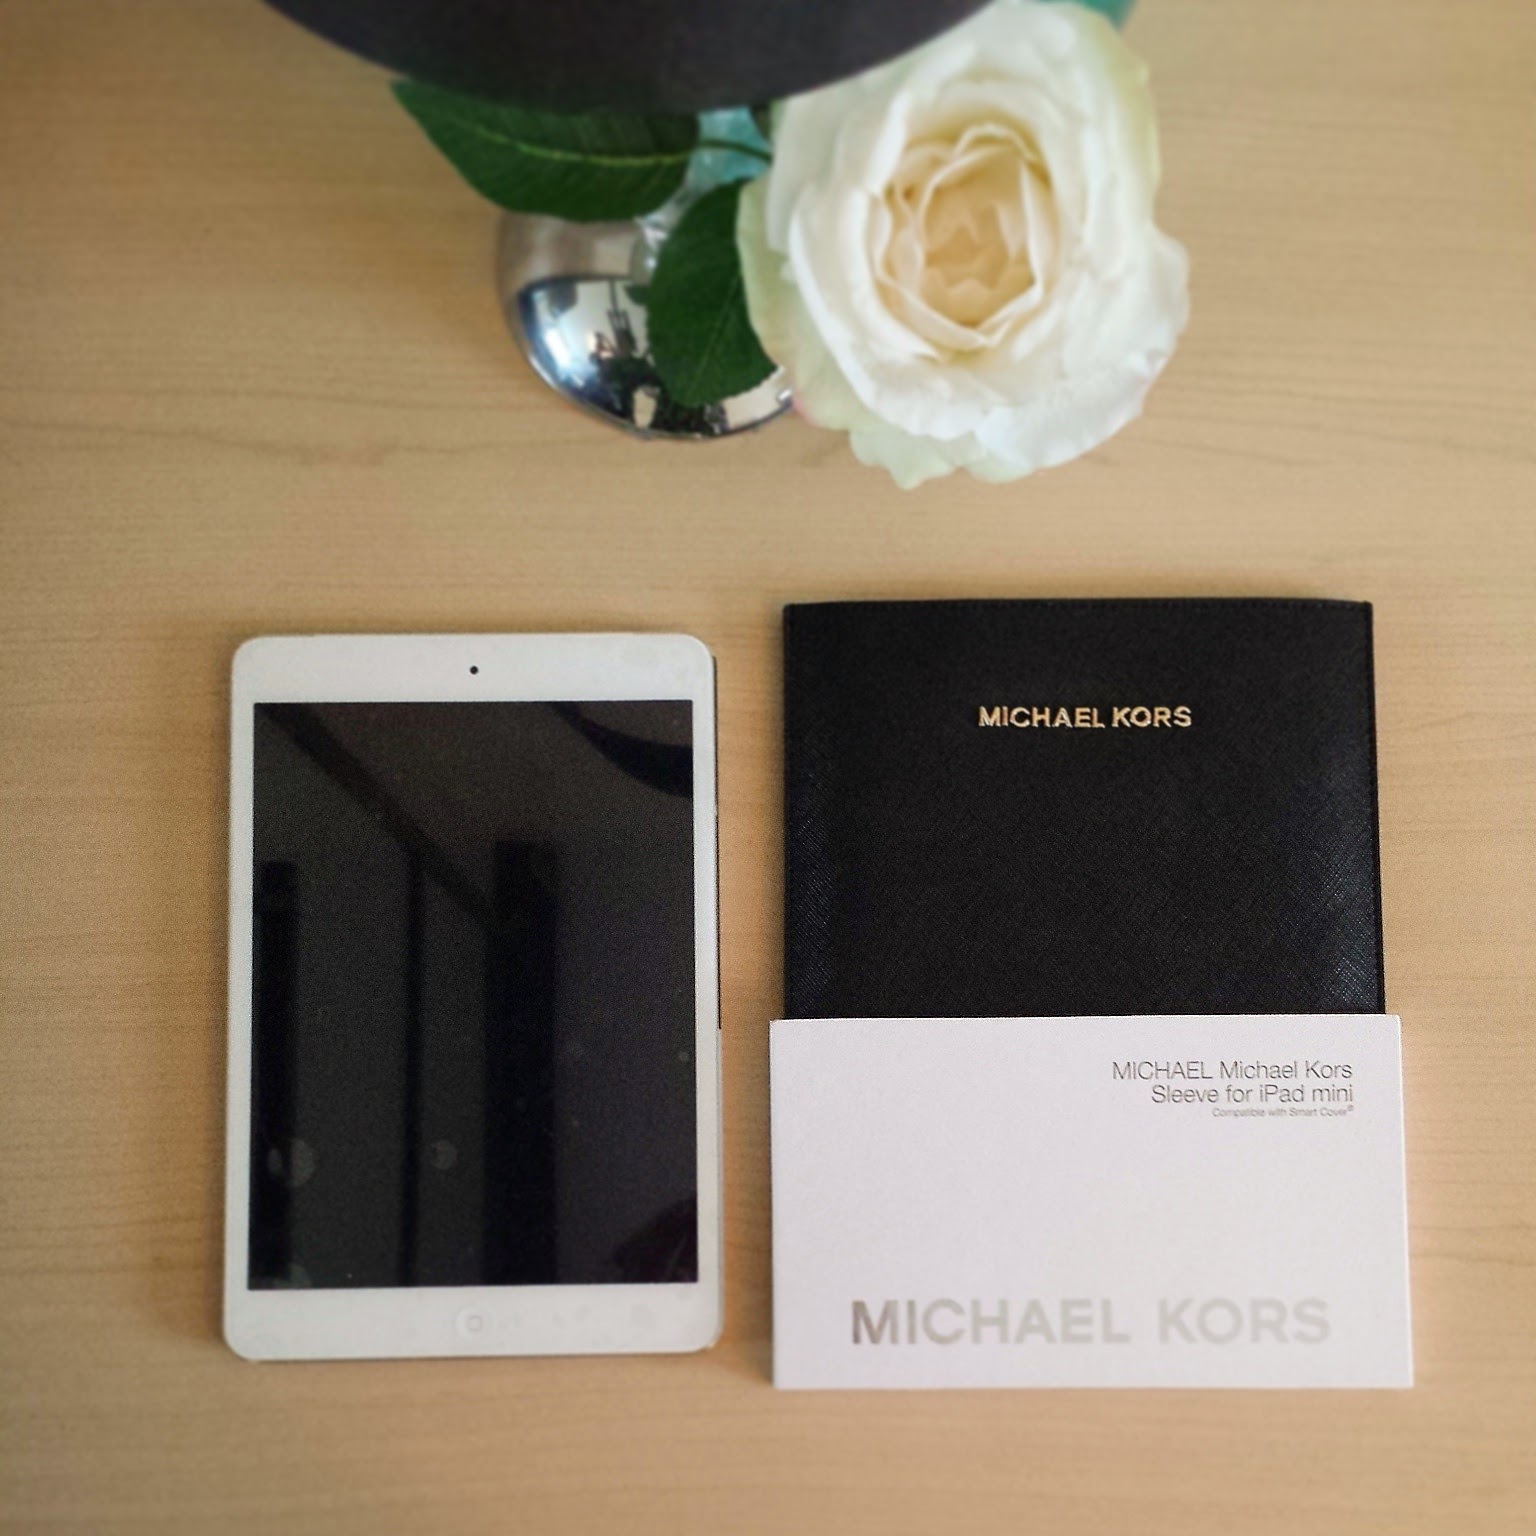 Fashion | Accessories Tuesday: Michael Kors iPad Sleeve | The Rager Wager  Blog